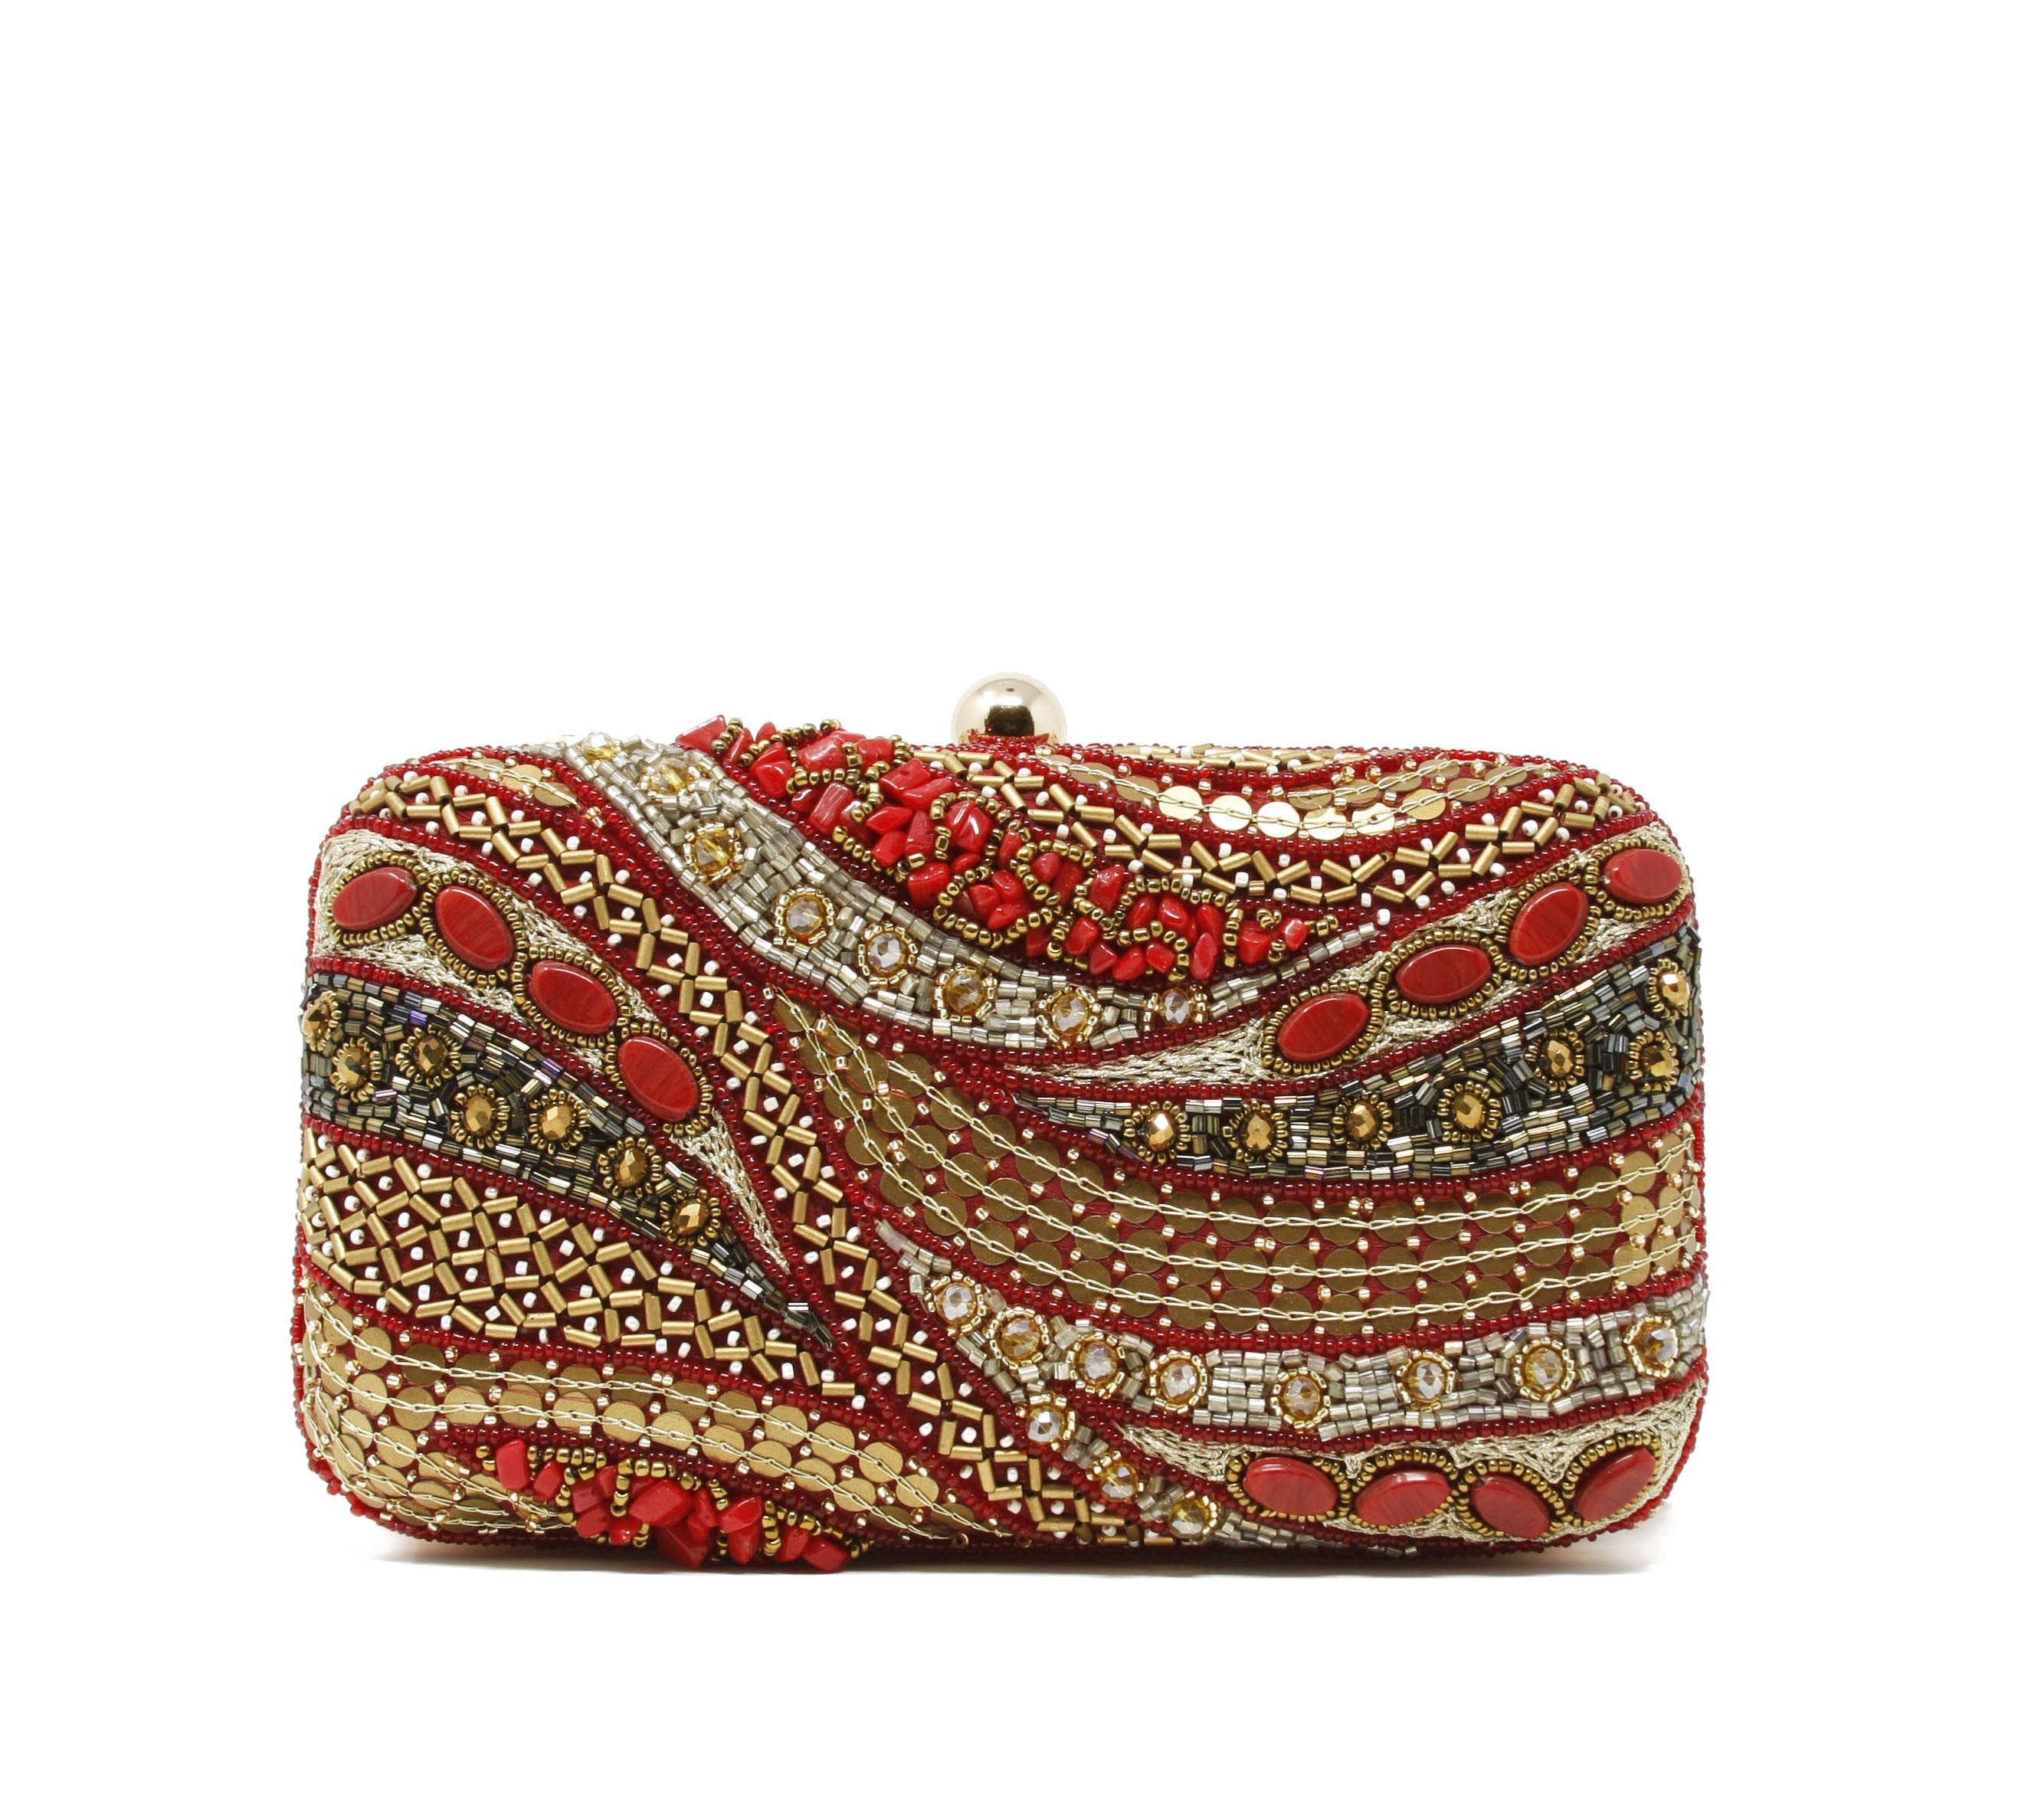 Gold and red clutch with Gold chain strap